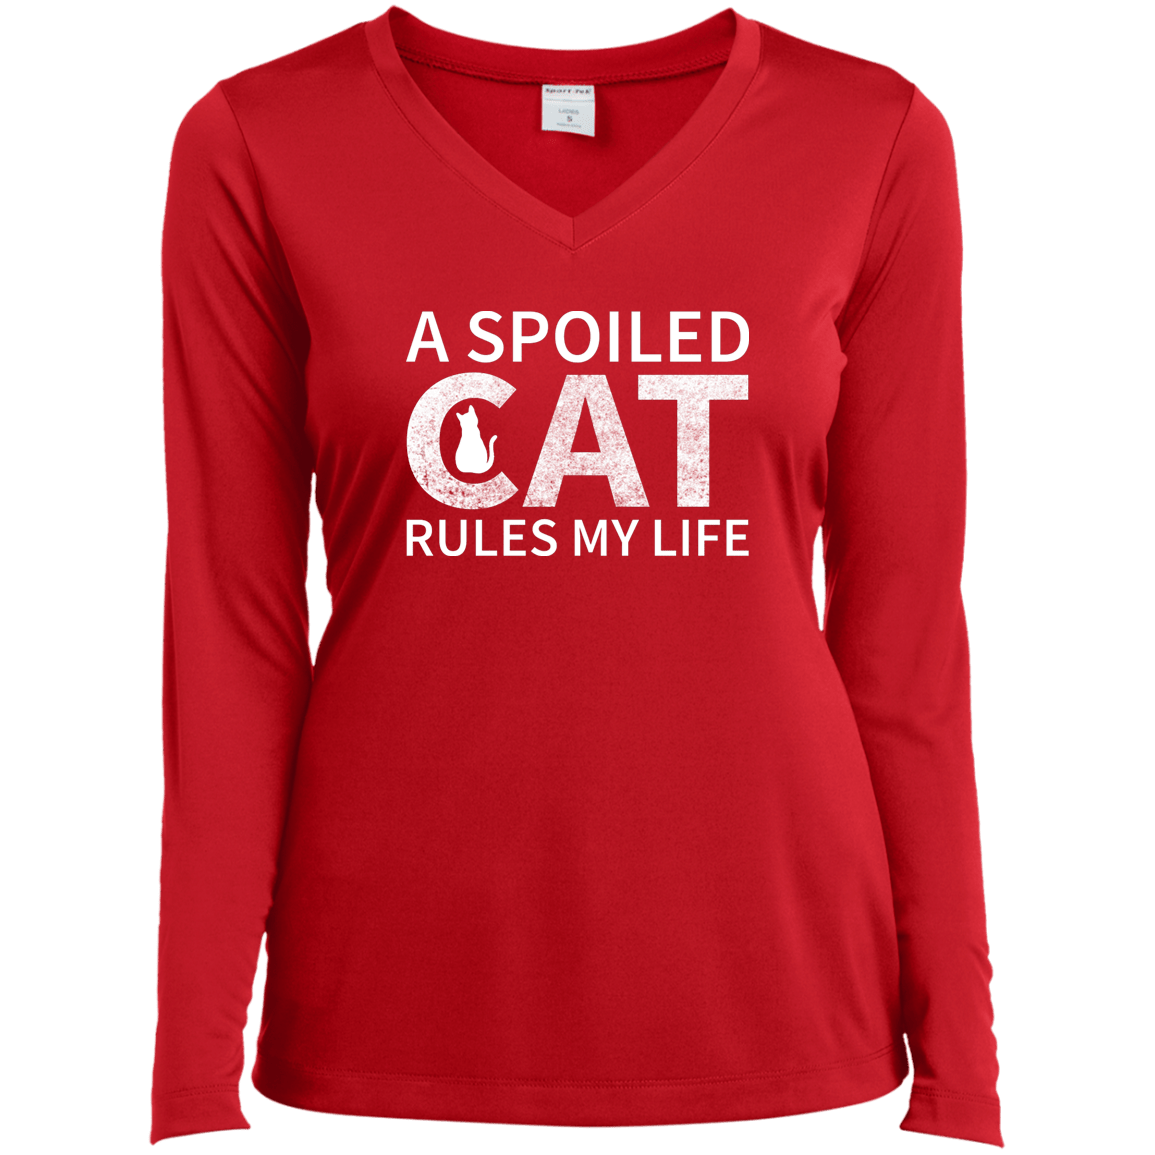 A Spoiled Cat Rules My Life - Long Sleeve Ladies V Neck.